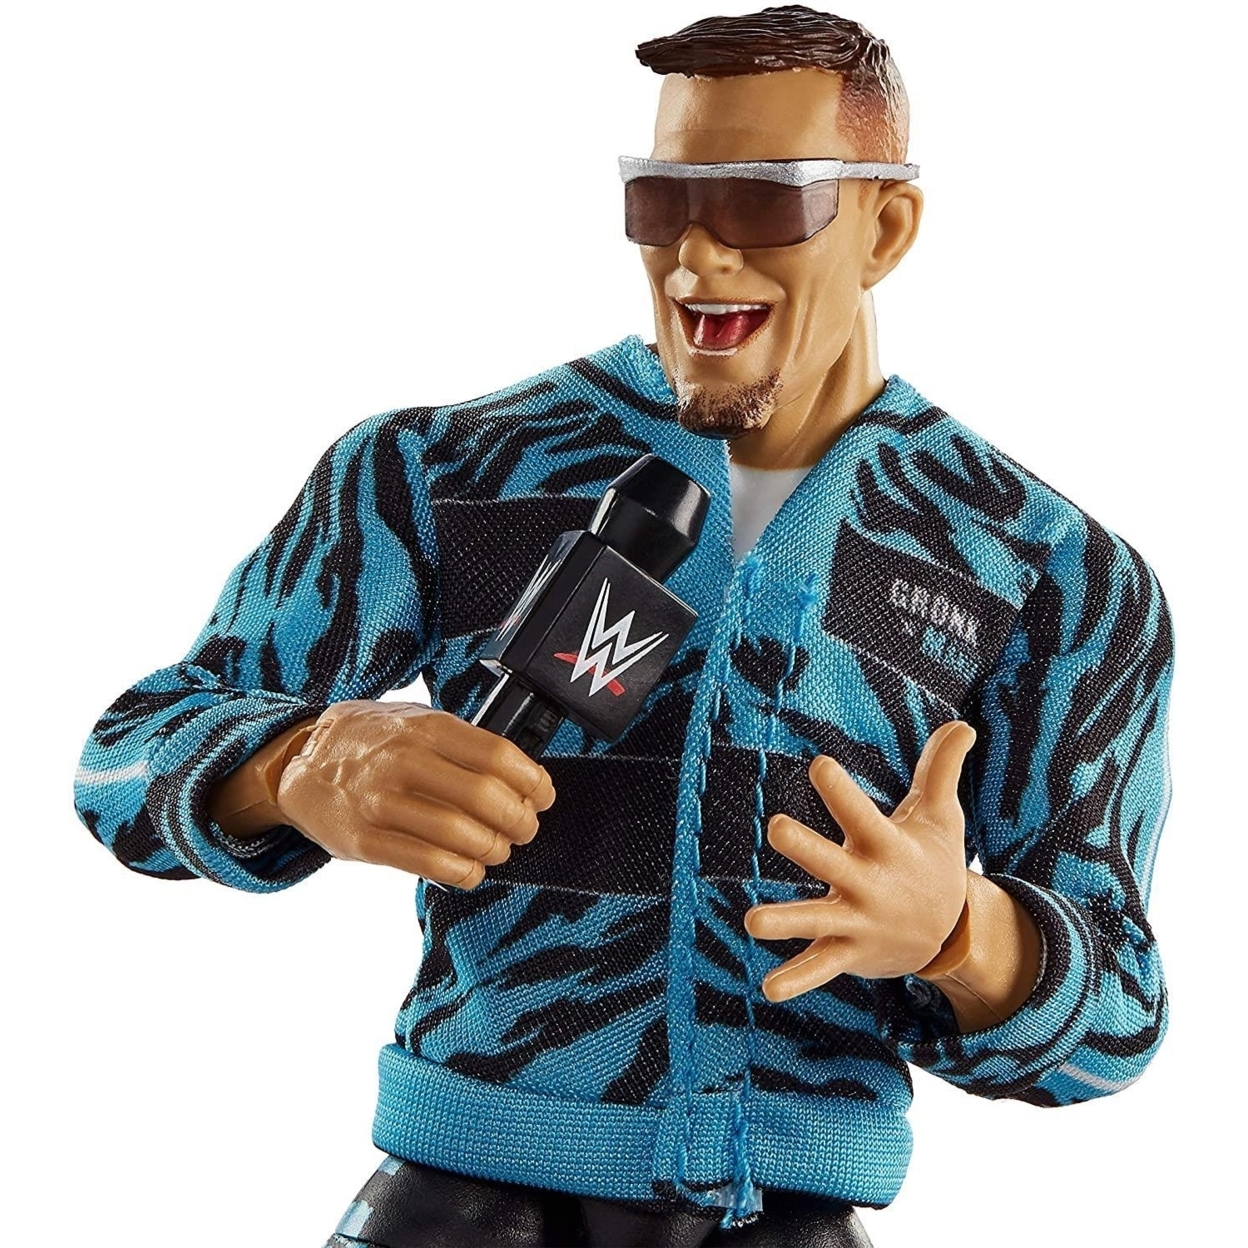 WWE Rob Gronkowski Elite Collection Action Figure with Accessories - image 5 of 7